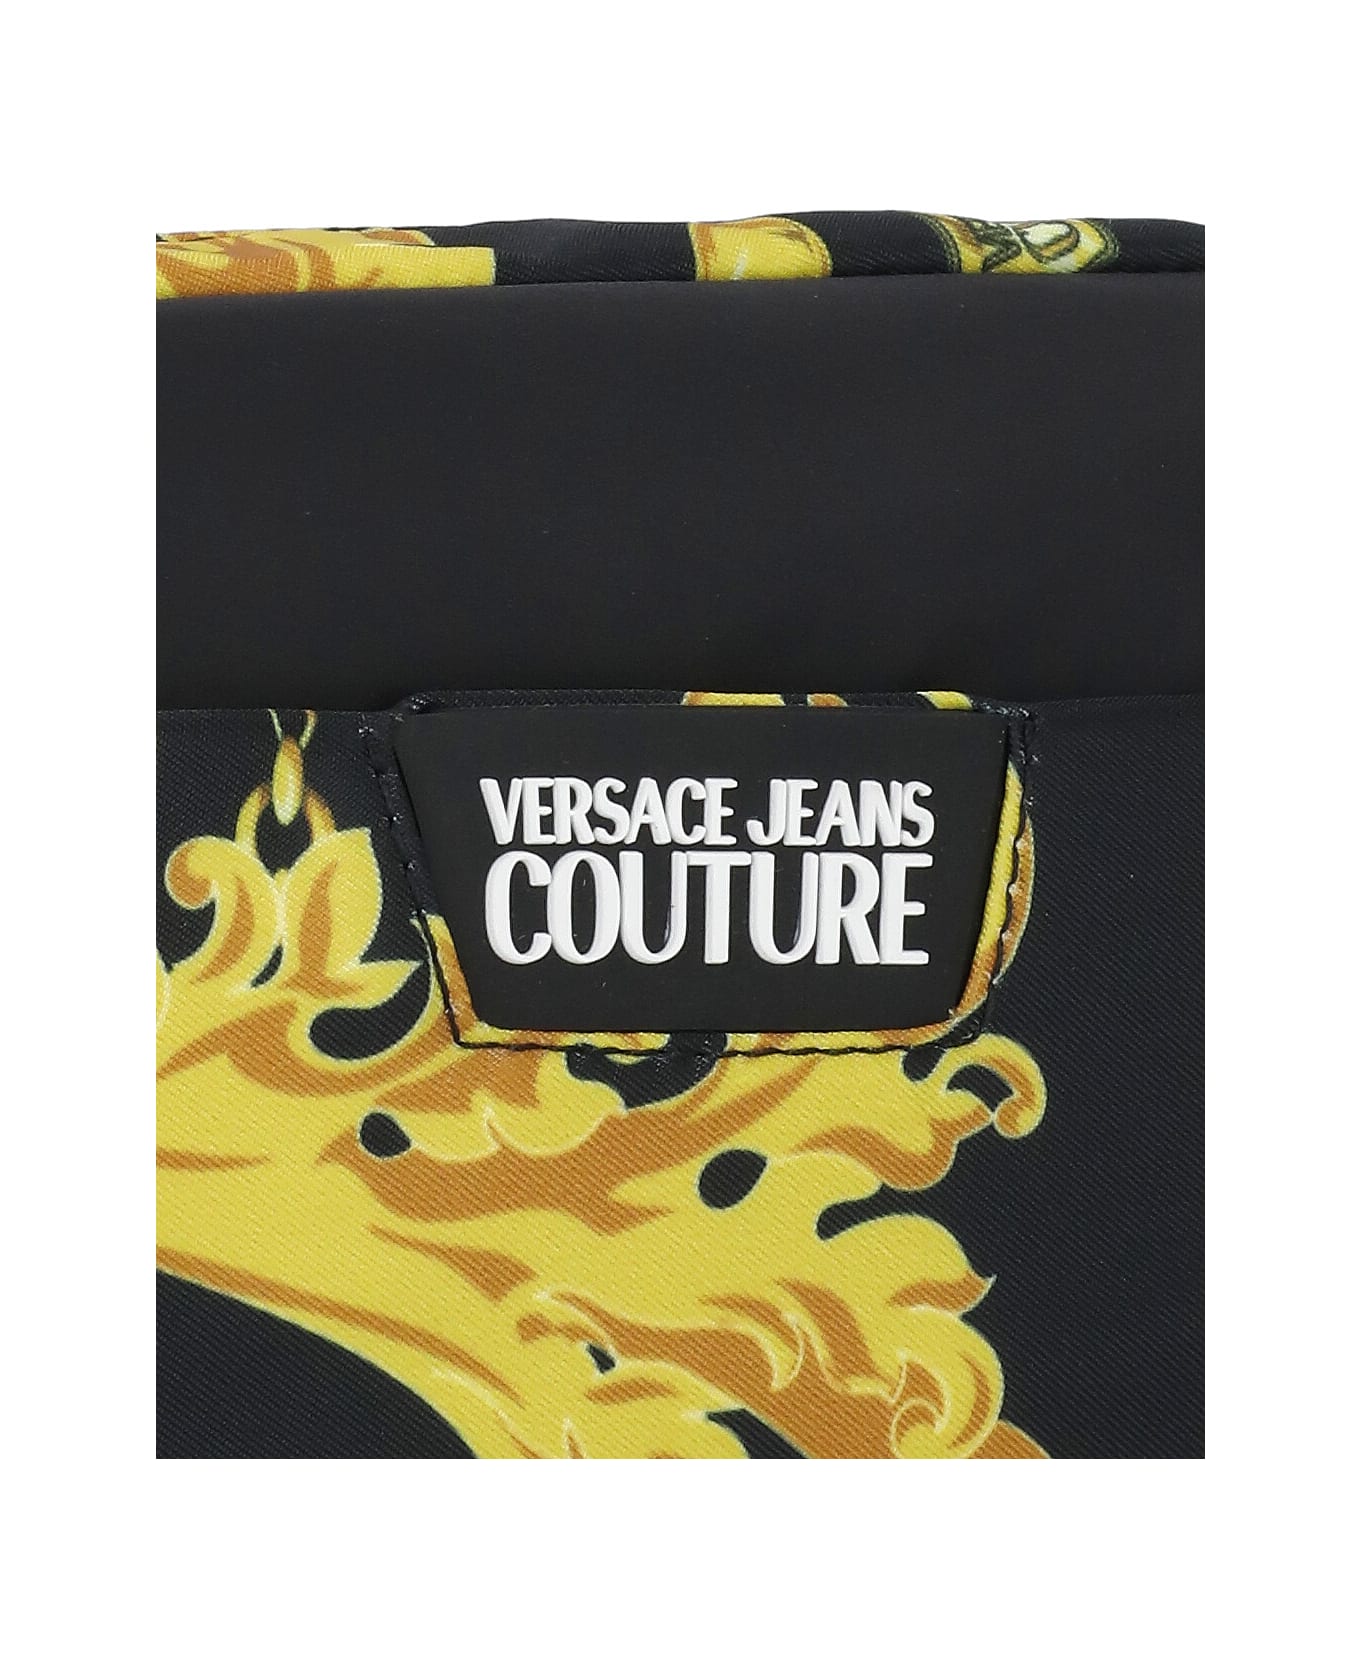 Versace Jeans Couture Beauty Case With Logo - Black